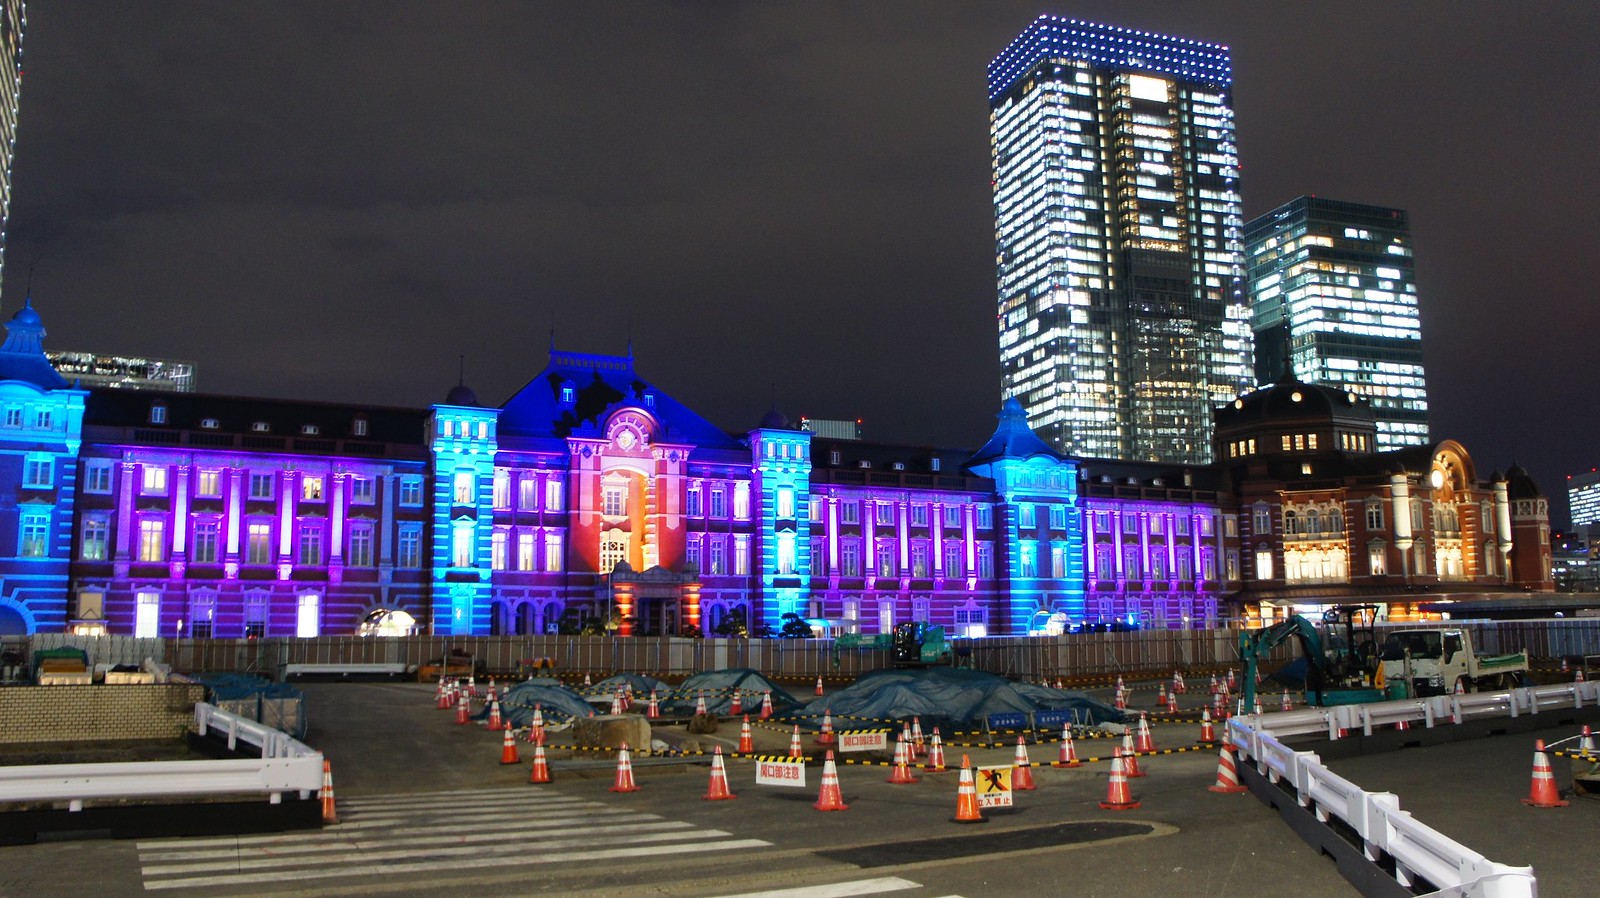 Light up at the 100th anniversary of JR Tokyo Station.